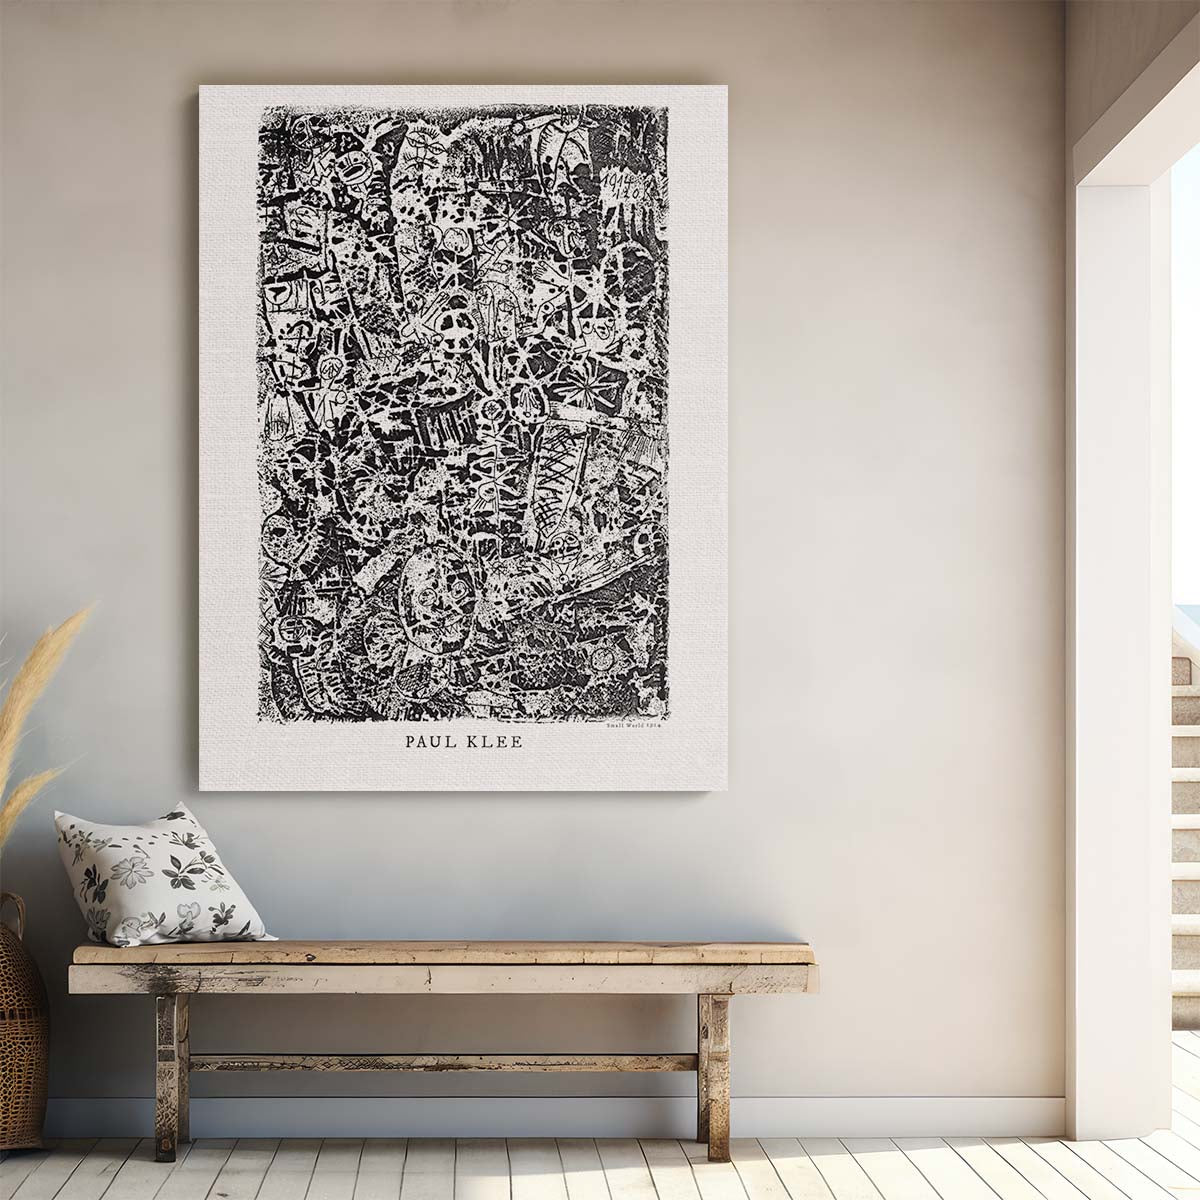 1914 Paul Klee Small World Monochrome Abstract Art Print by Luxuriance Designs, made in USA